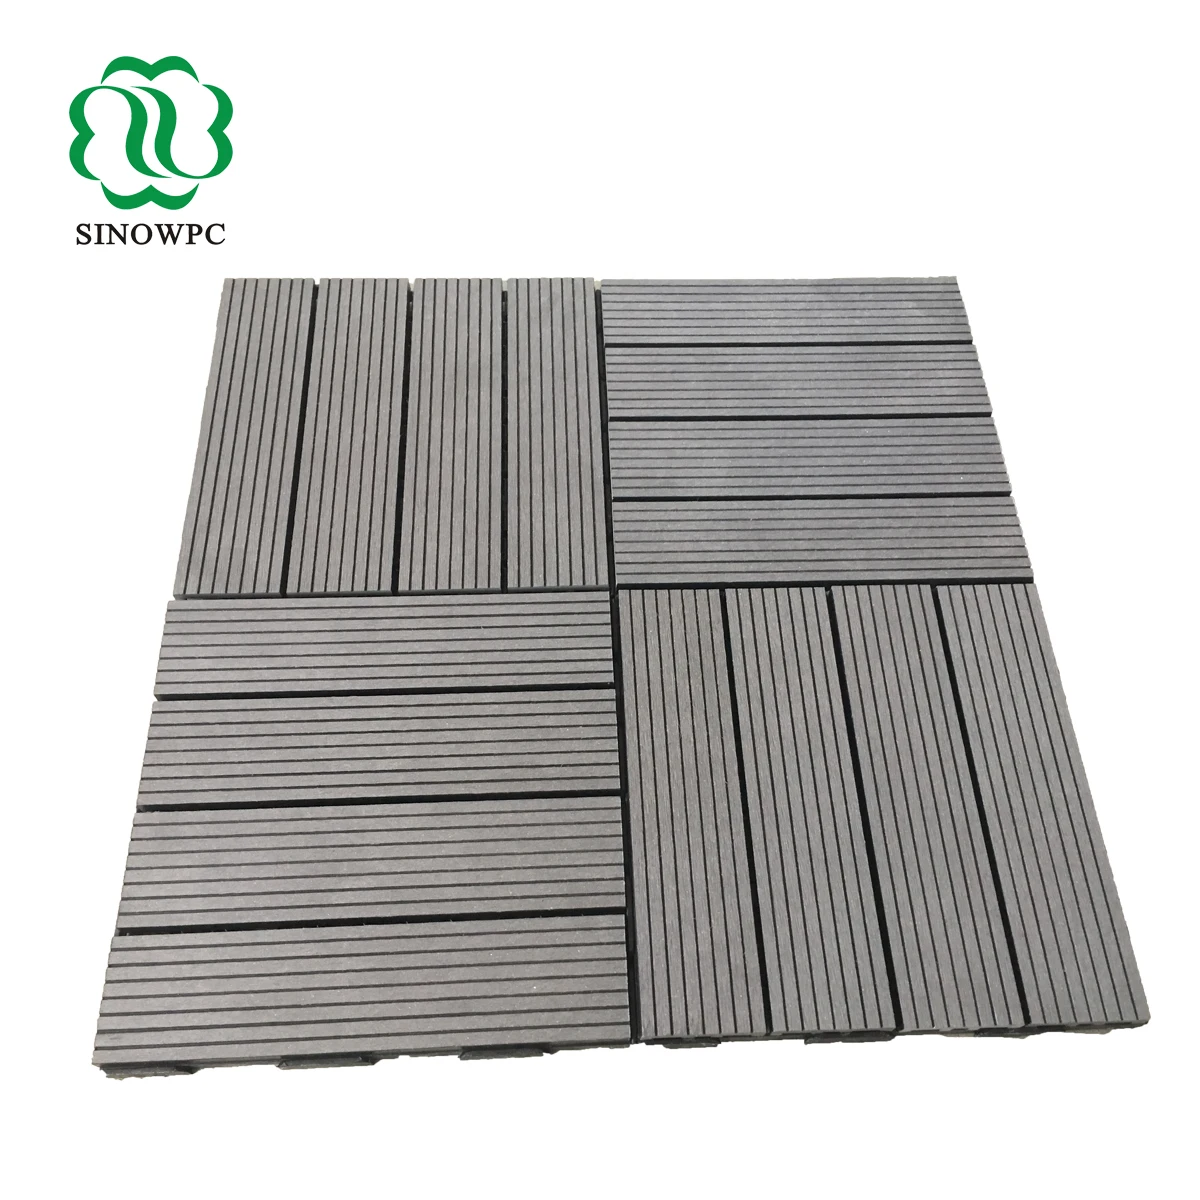 Most Easy To Install Wpc Floor Diy Deck Tiles For Bathroom Balcony